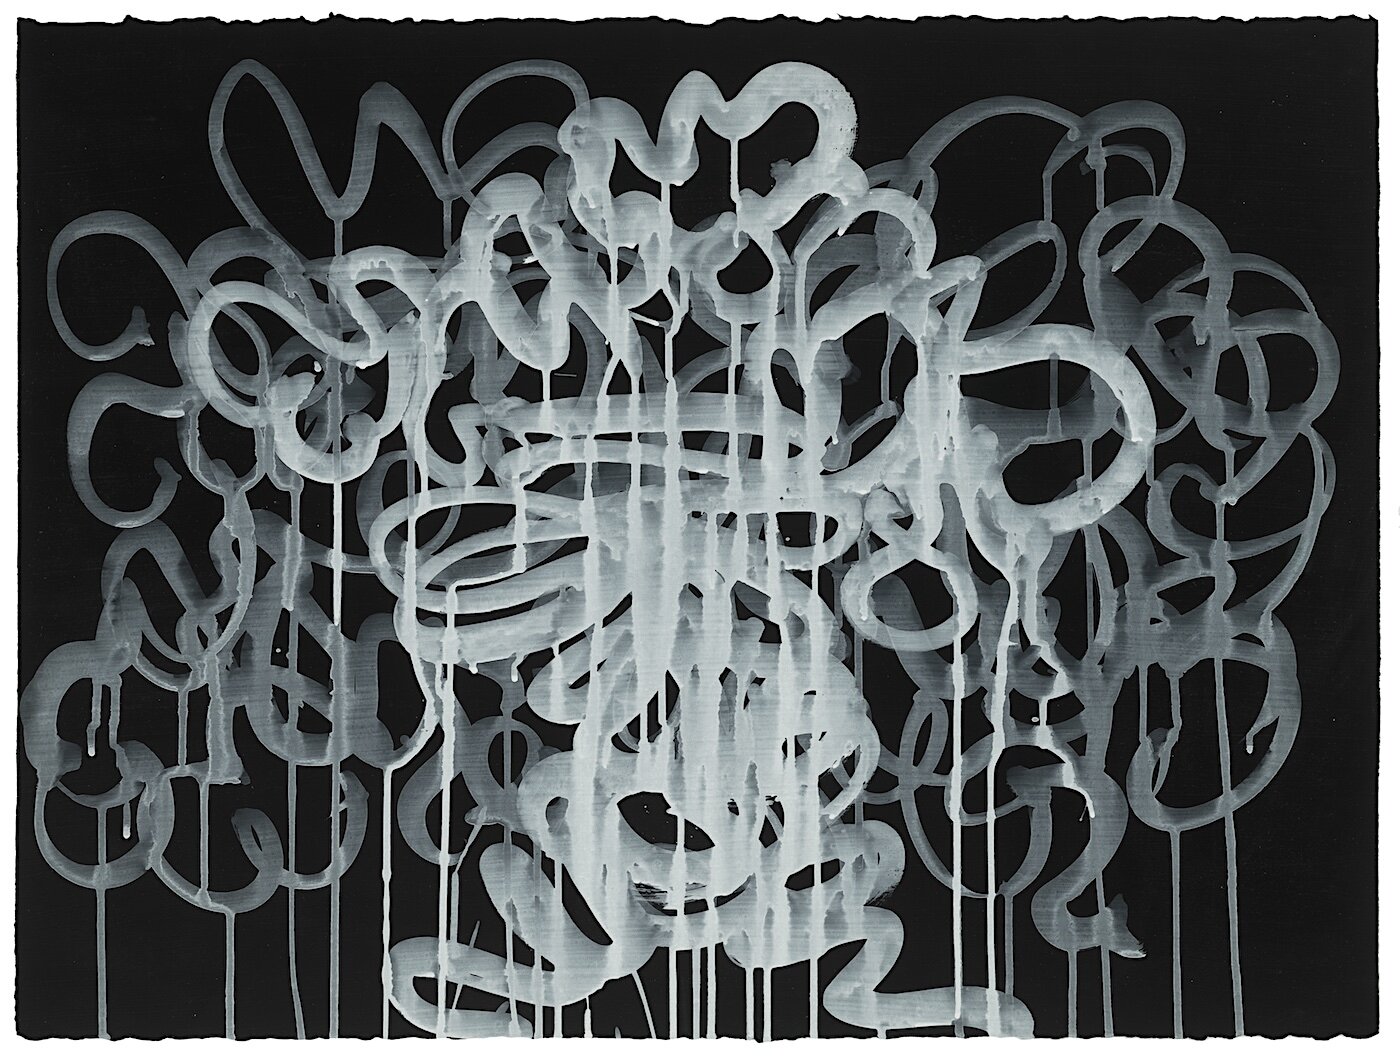    squiggle bouquet #2  , 2020  Gouache on black primed d'arches paper  22 x 30 in. 